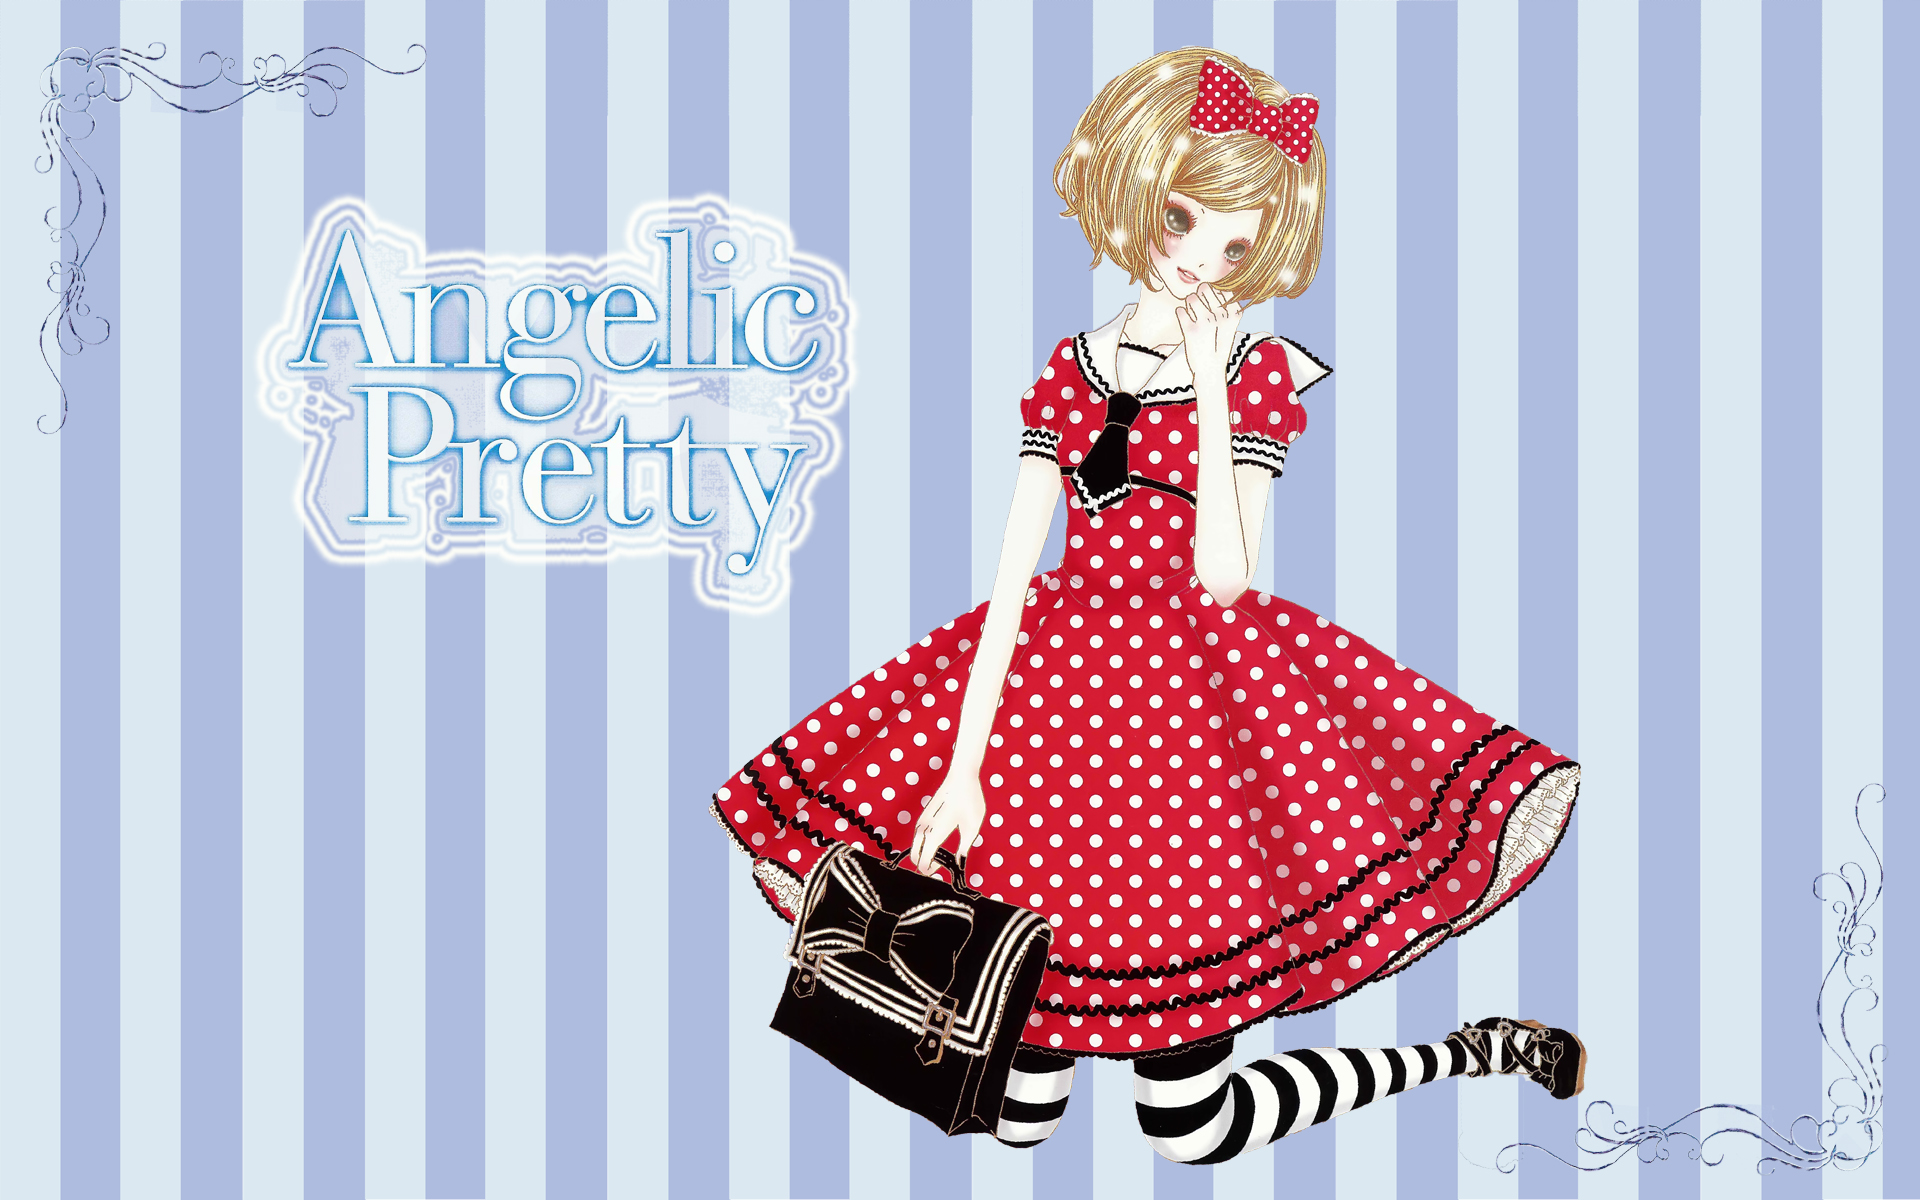 Angelic pretty wallpaper 37 by guillaumes2 on DeviantArt